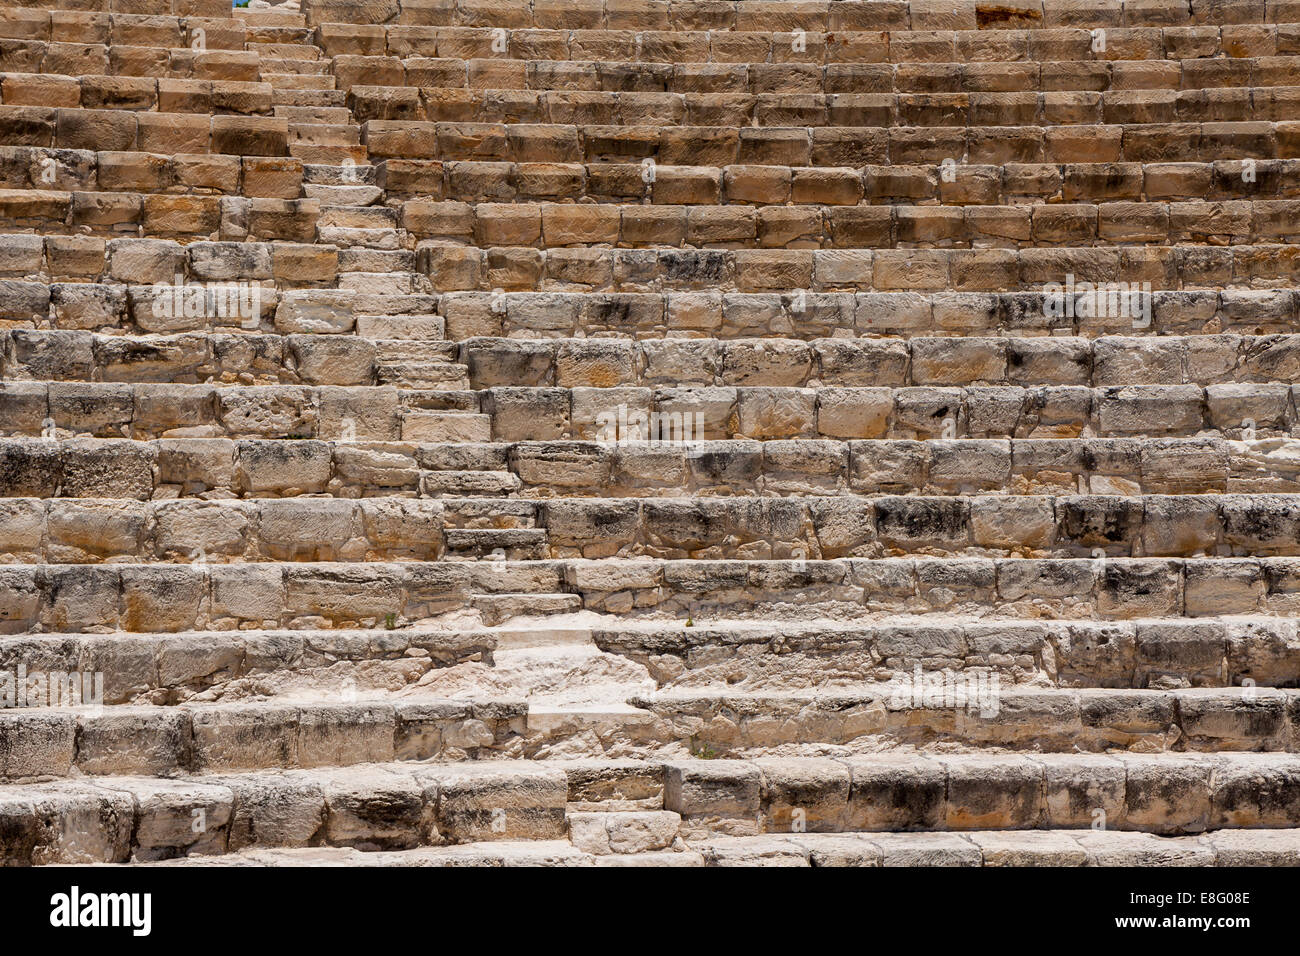 Restored ampitheatre  in the ruins at Kourion in Cyprus Stock Photo